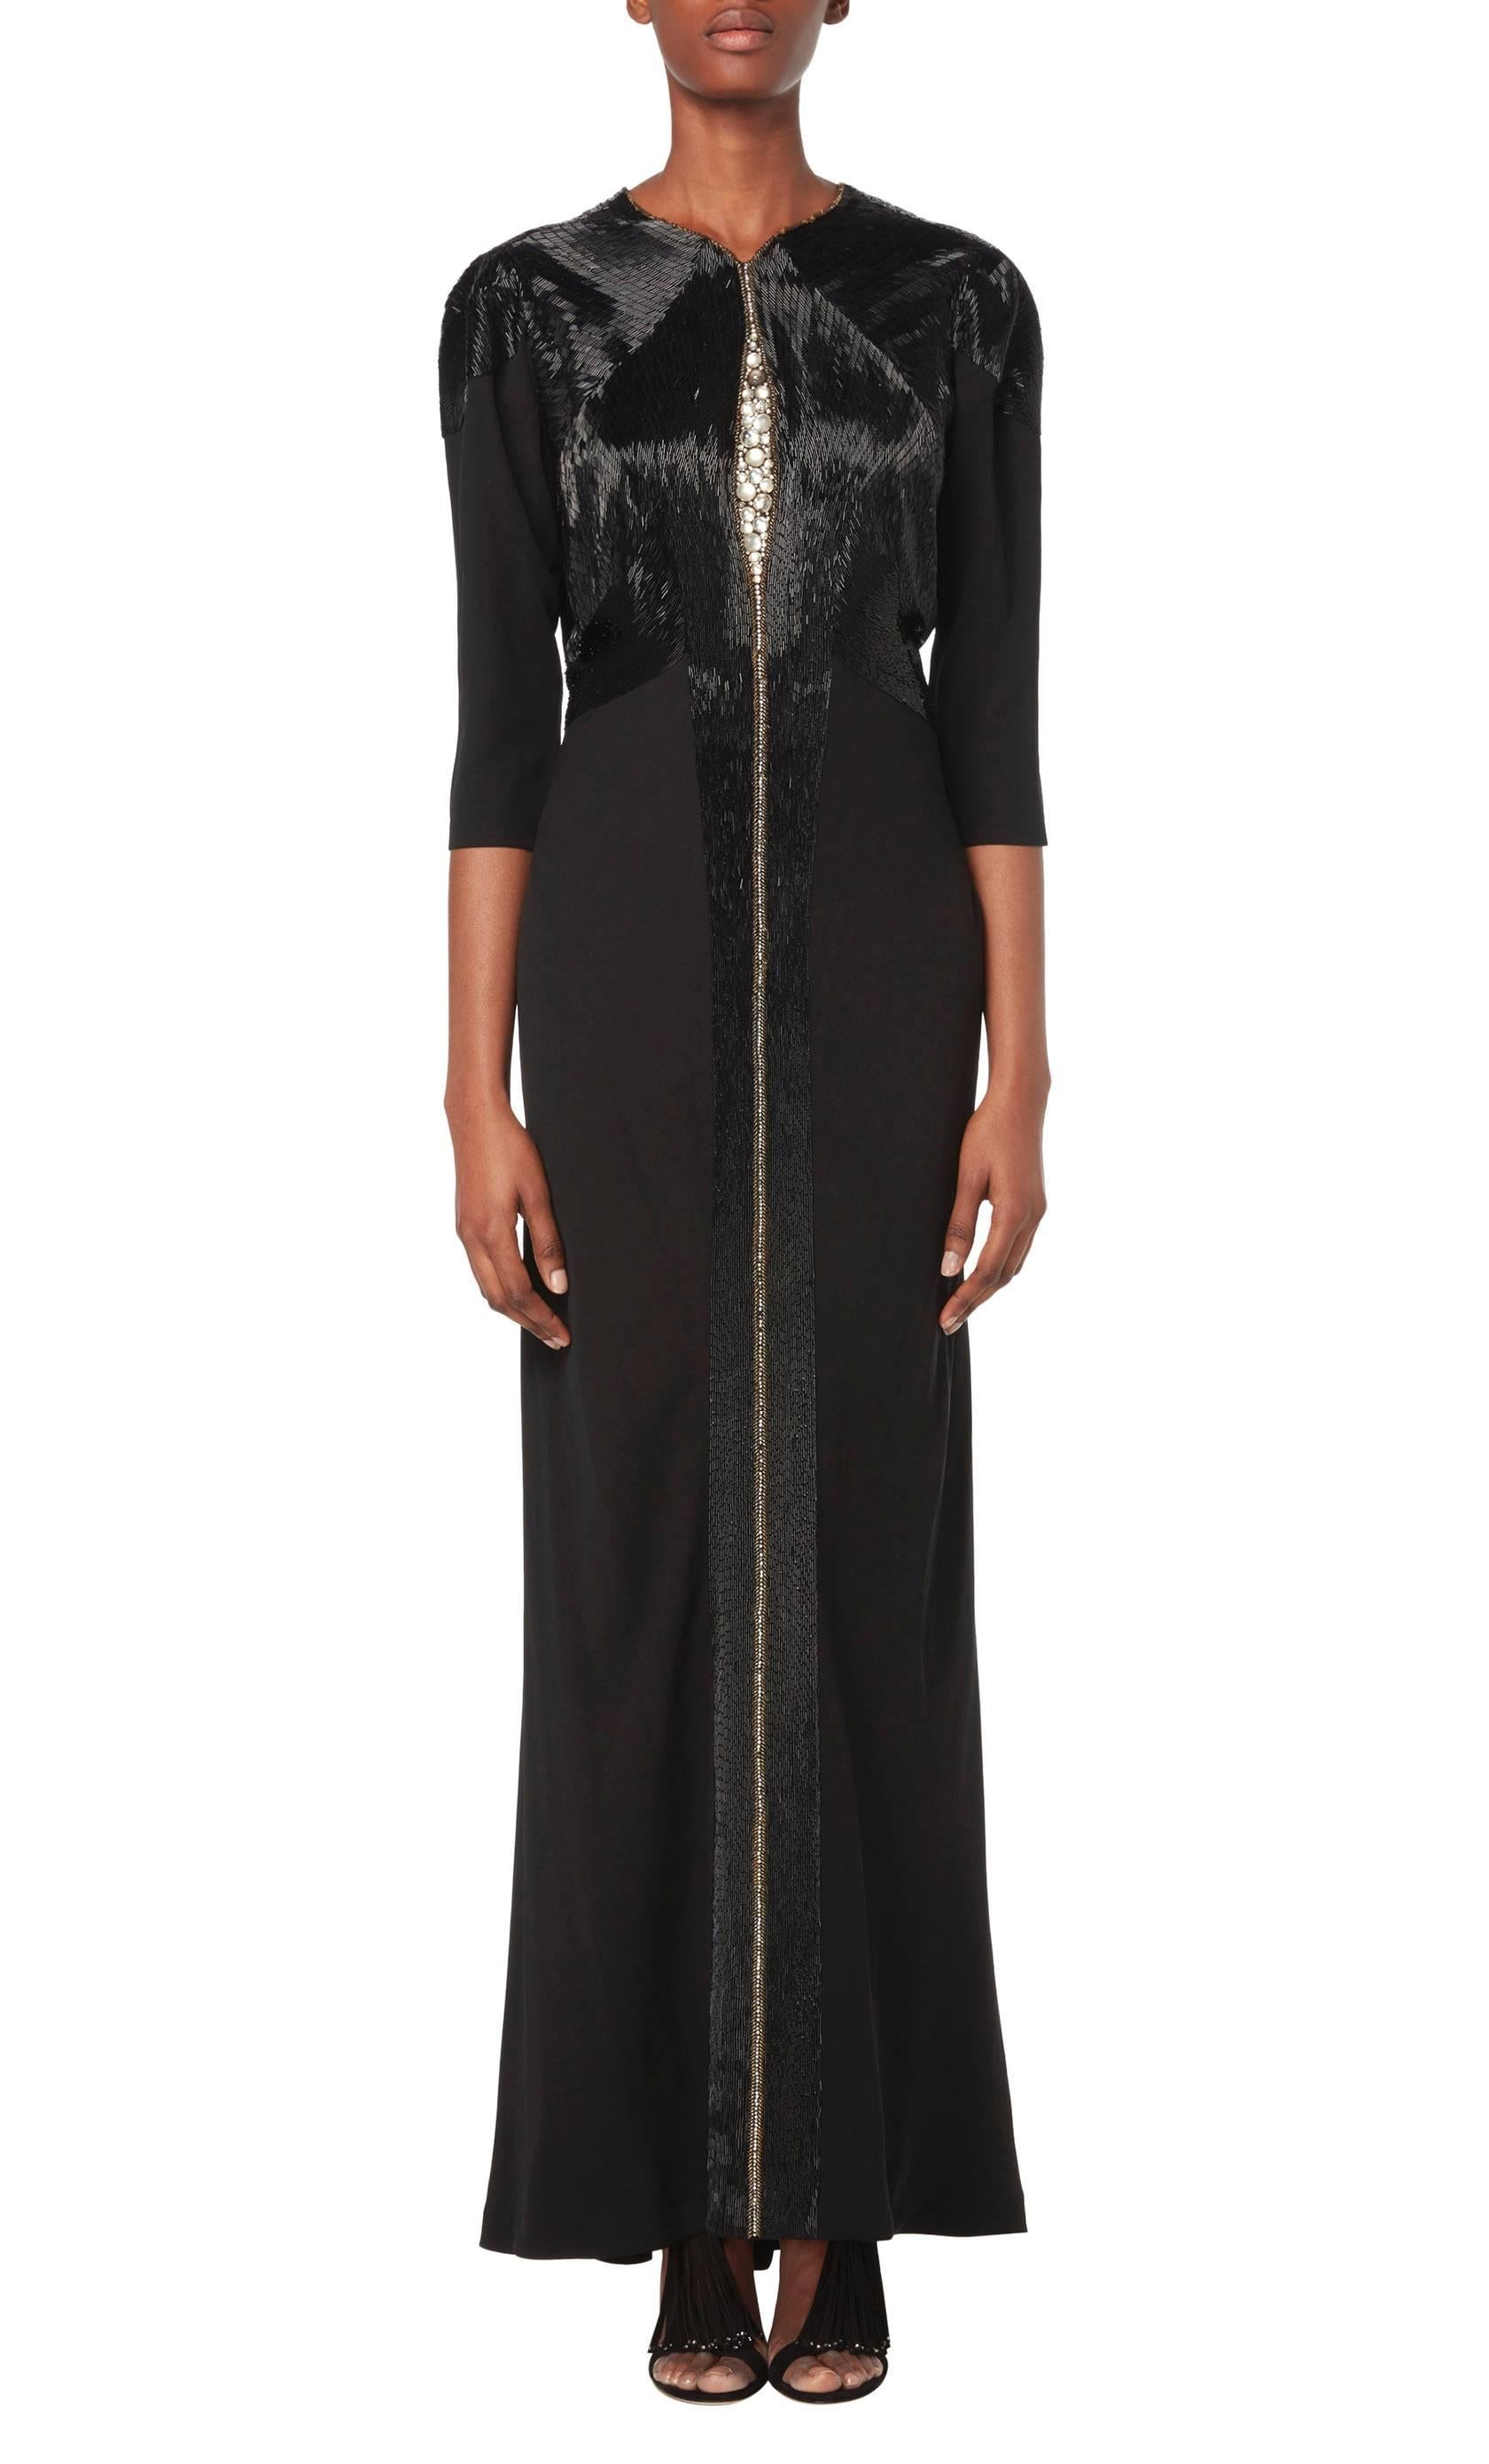 This rare example of Lucien Lelong channels Art Deco glamour perfectly. Lelong was not only a leading couturier of the 1930s but also the head of the Haute Couture Syndicate and the man who discovered Balmain and Dior. Constructed in black silk